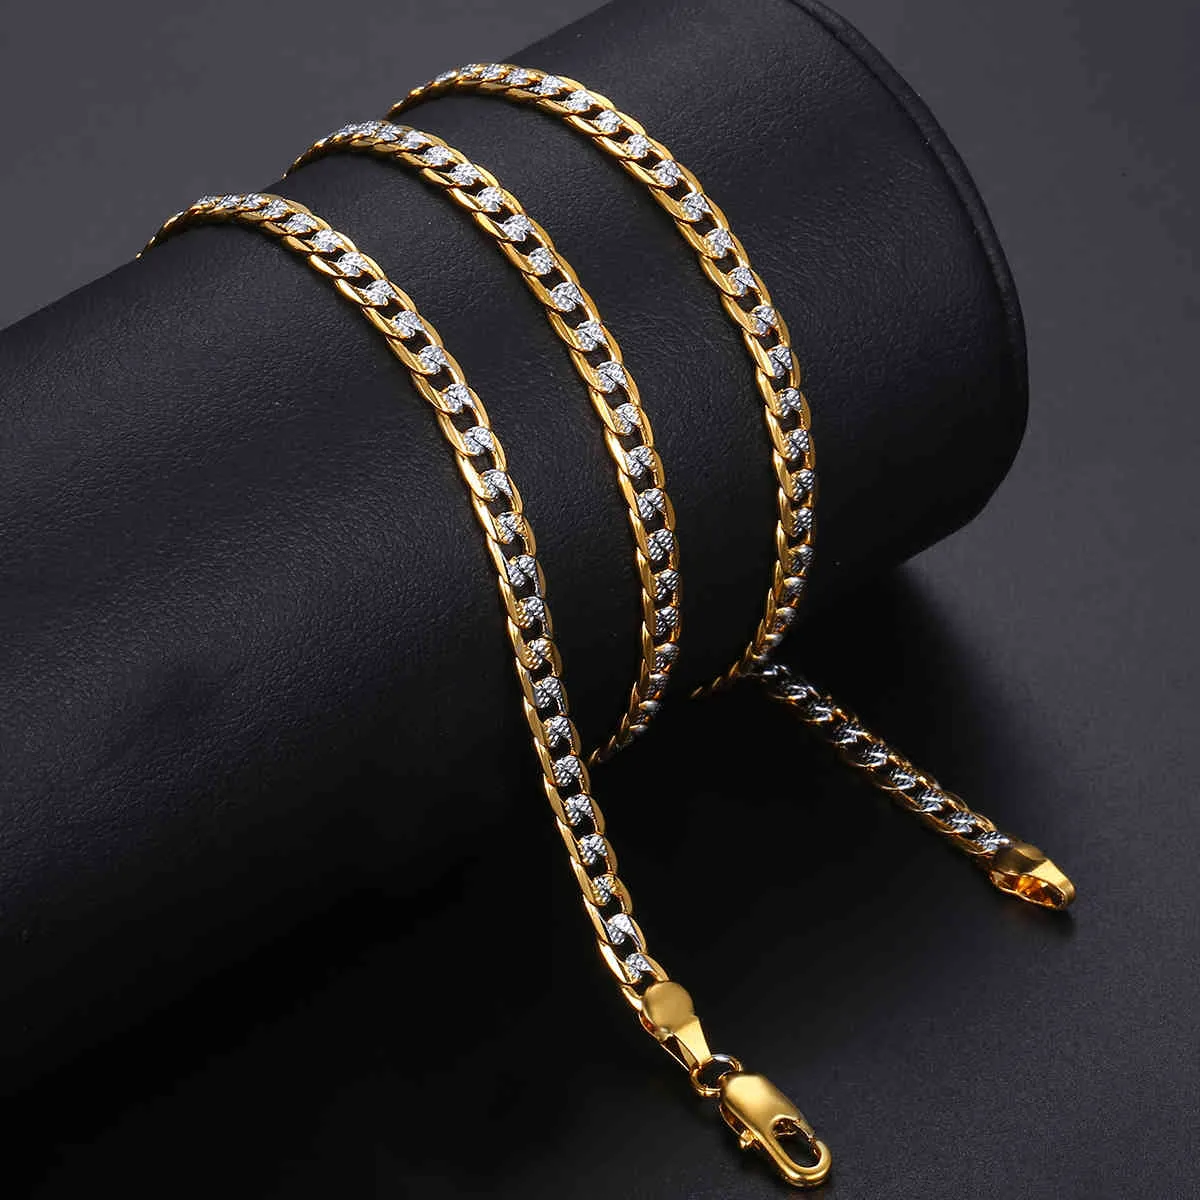 4mm Flat Hammered Curb Cuban Necklace Bracelet Gold Mix Silver Color for Women Men Jewelry Set GN64A 256x